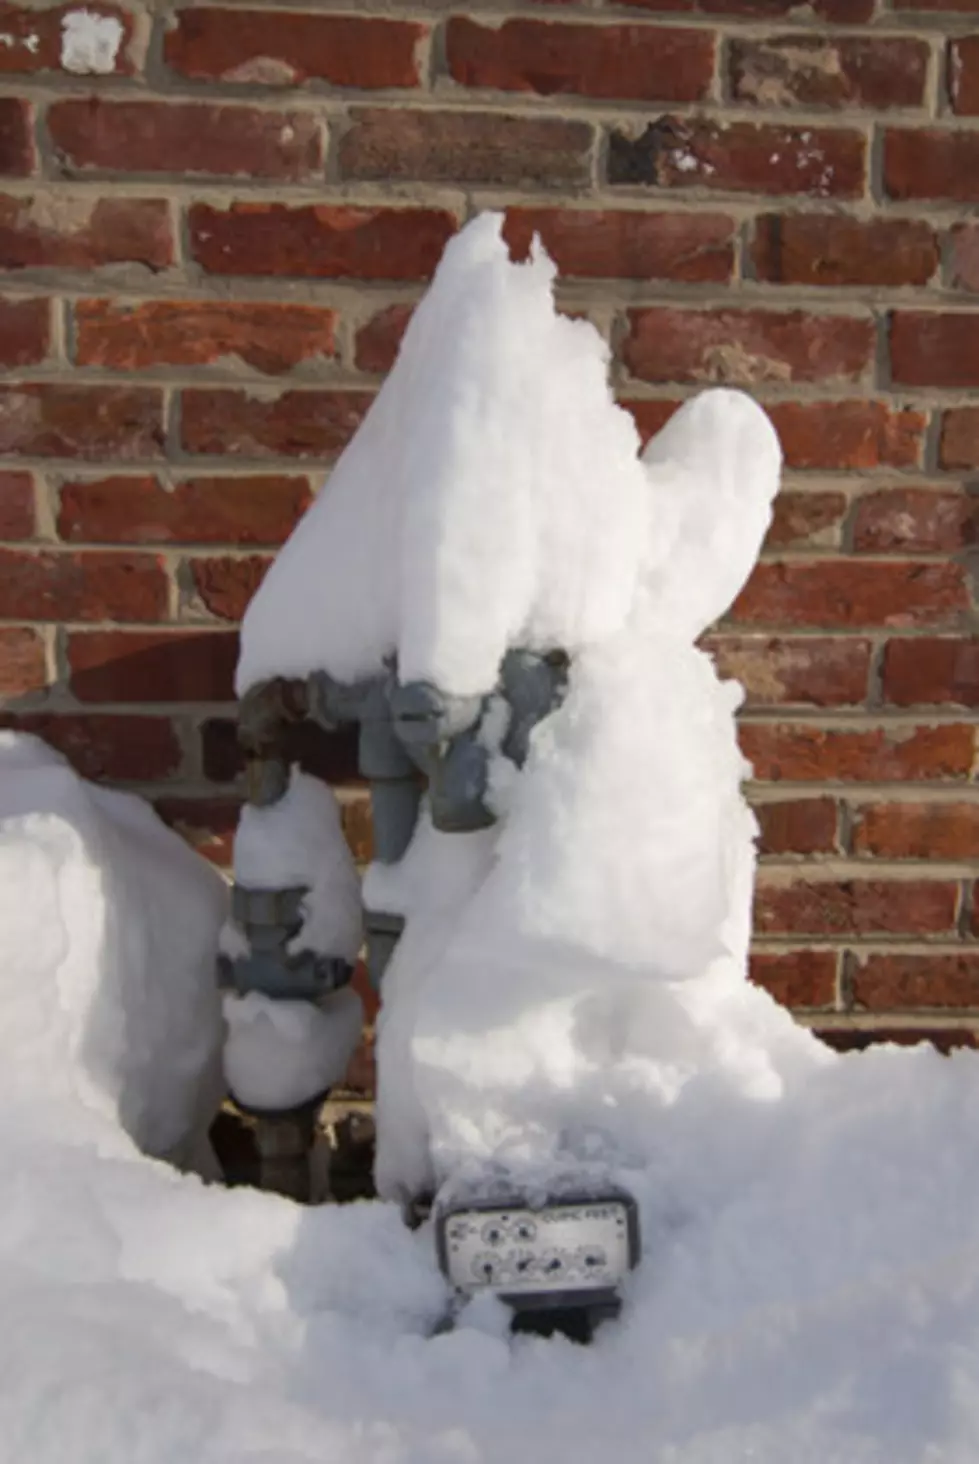 Tips on How to Prepare Your Pipes From Freezing and Becoming Costly